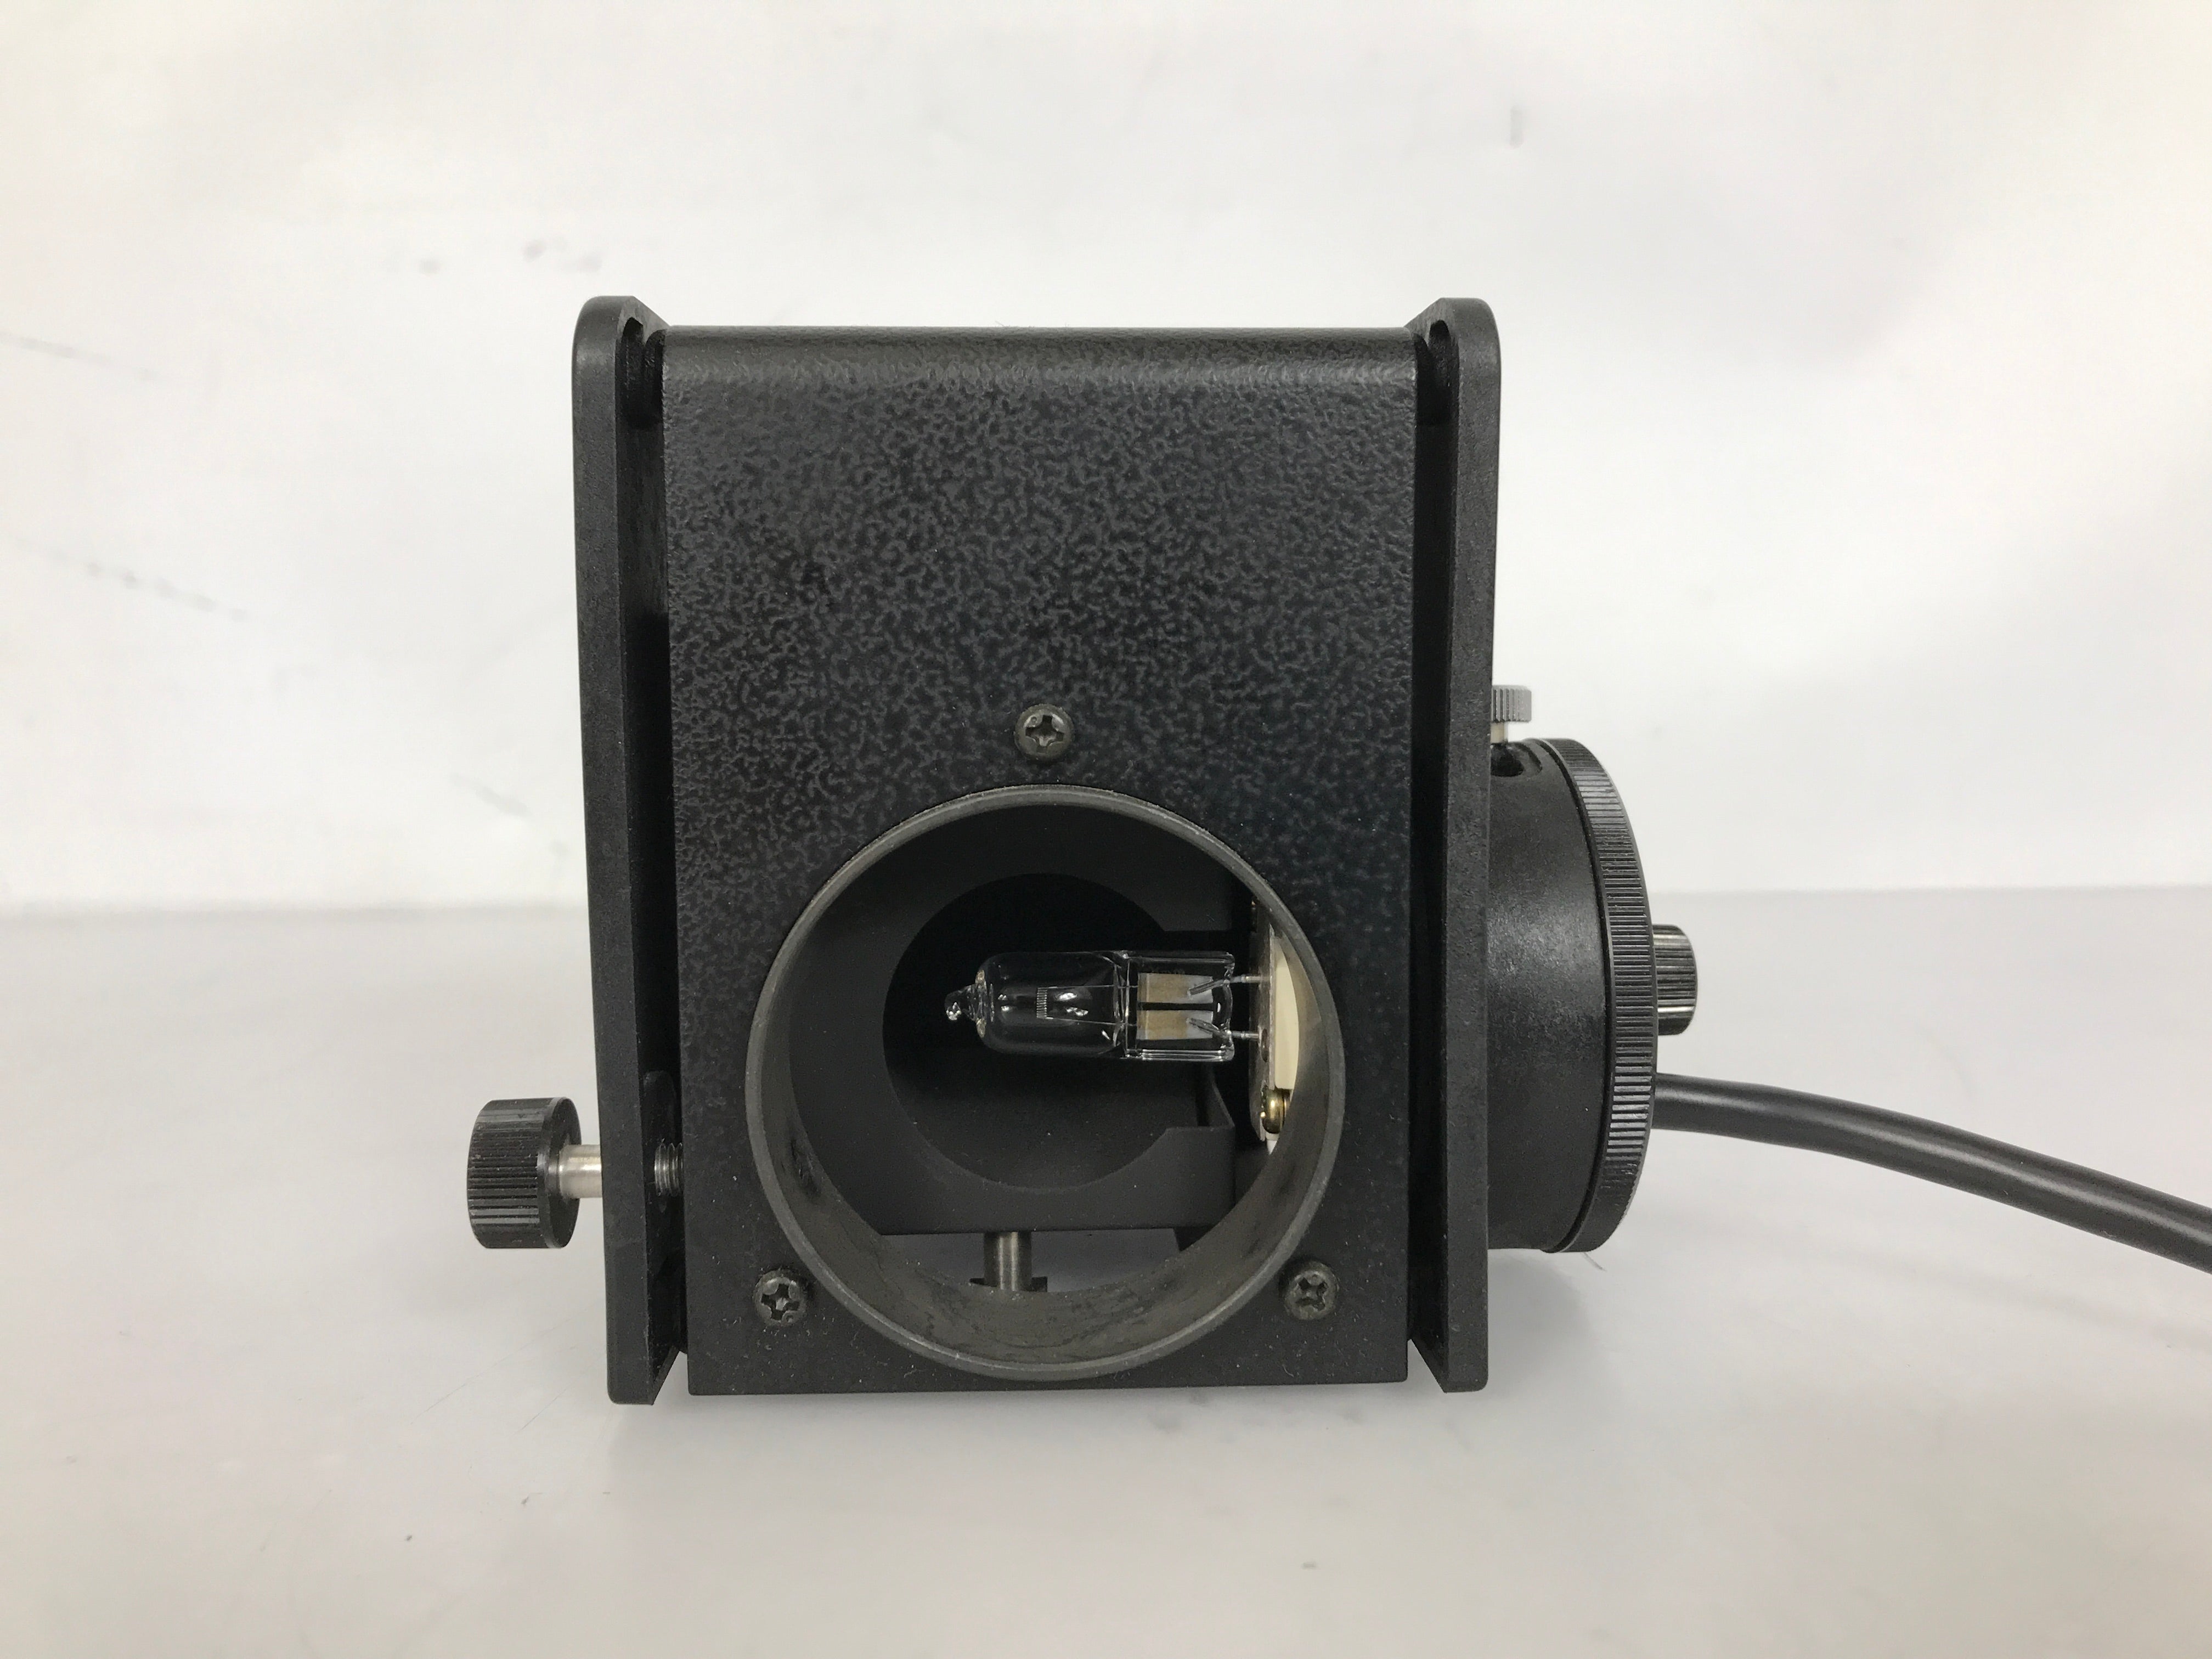 Nikon 12v 50w Lamp House for Diaphot Microscope *For Parts or Repair*